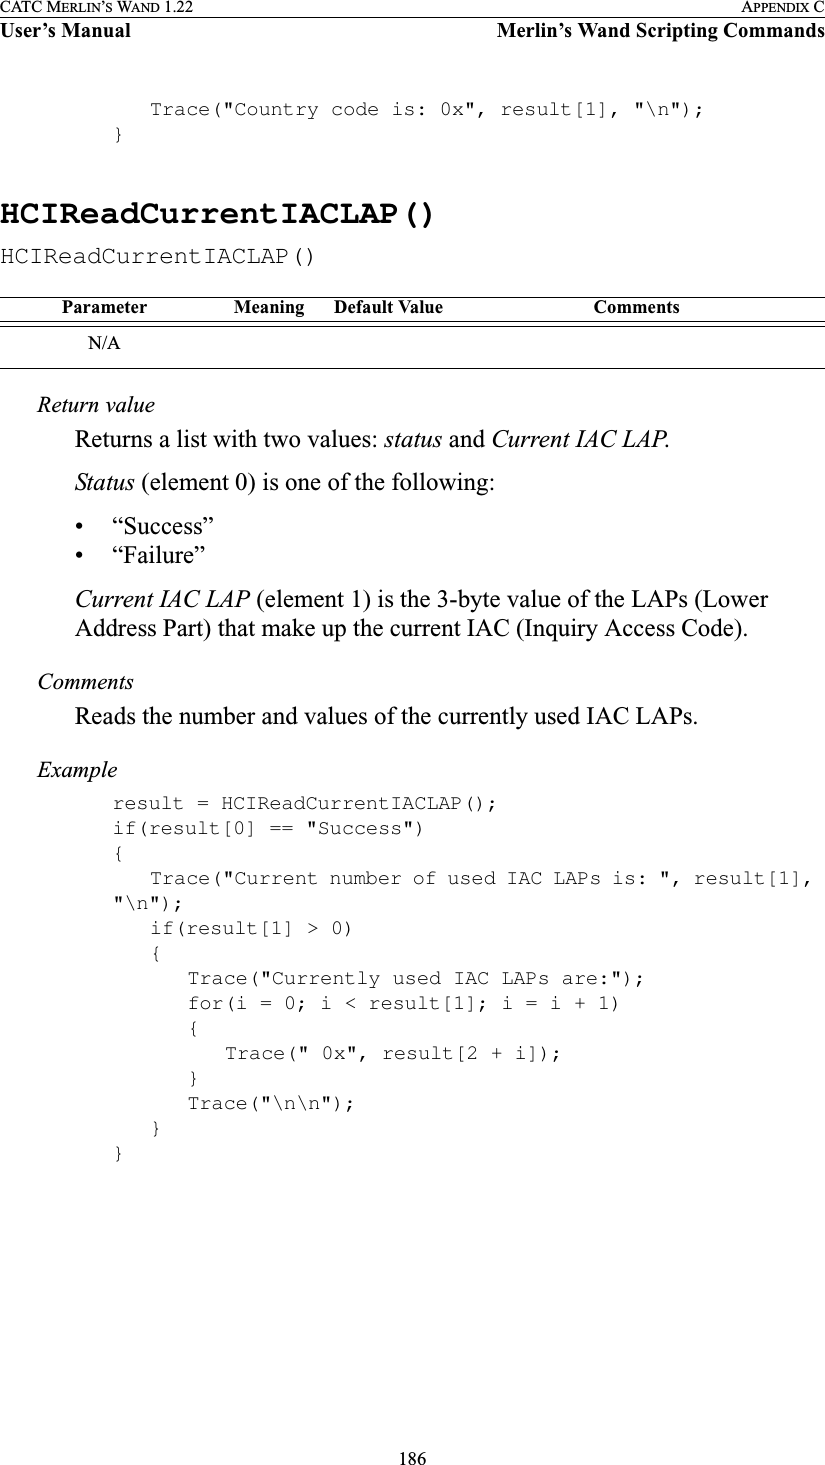 186CATC MERLIN’S WAND 1.22 APPENDIX CUser’s Manual Merlin’s Wand Scripting CommandsTrace(&quot;Country code is: 0x&quot;, result[1], &quot;\n&quot;);}HCIReadCurrentIACLAP()HCIReadCurrentIACLAP()Return valueReturns a list with two values: status and Current IAC LAP.Status (element 0) is one of the following:• “Success”• “Failure”Current IAC LAP (element 1) is the 3-byte value of the LAPs (Lower Address Part) that make up the current IAC (Inquiry Access Code).CommentsReads the number and values of the currently used IAC LAPs.Exampleresult = HCIReadCurrentIACLAP();if(result[0] == &quot;Success&quot;){Trace(&quot;Current number of used IAC LAPs is: &quot;, result[1], &quot;\n&quot;);if(result[1] &gt; 0){Trace(&quot;Currently used IAC LAPs are:&quot;);for(i = 0; i &lt; result[1]; i = i + 1){Trace(&quot; 0x&quot;, result[2 + i]);}Trace(&quot;\n\n&quot;);}}Parameter Meaning Default Value CommentsN/A